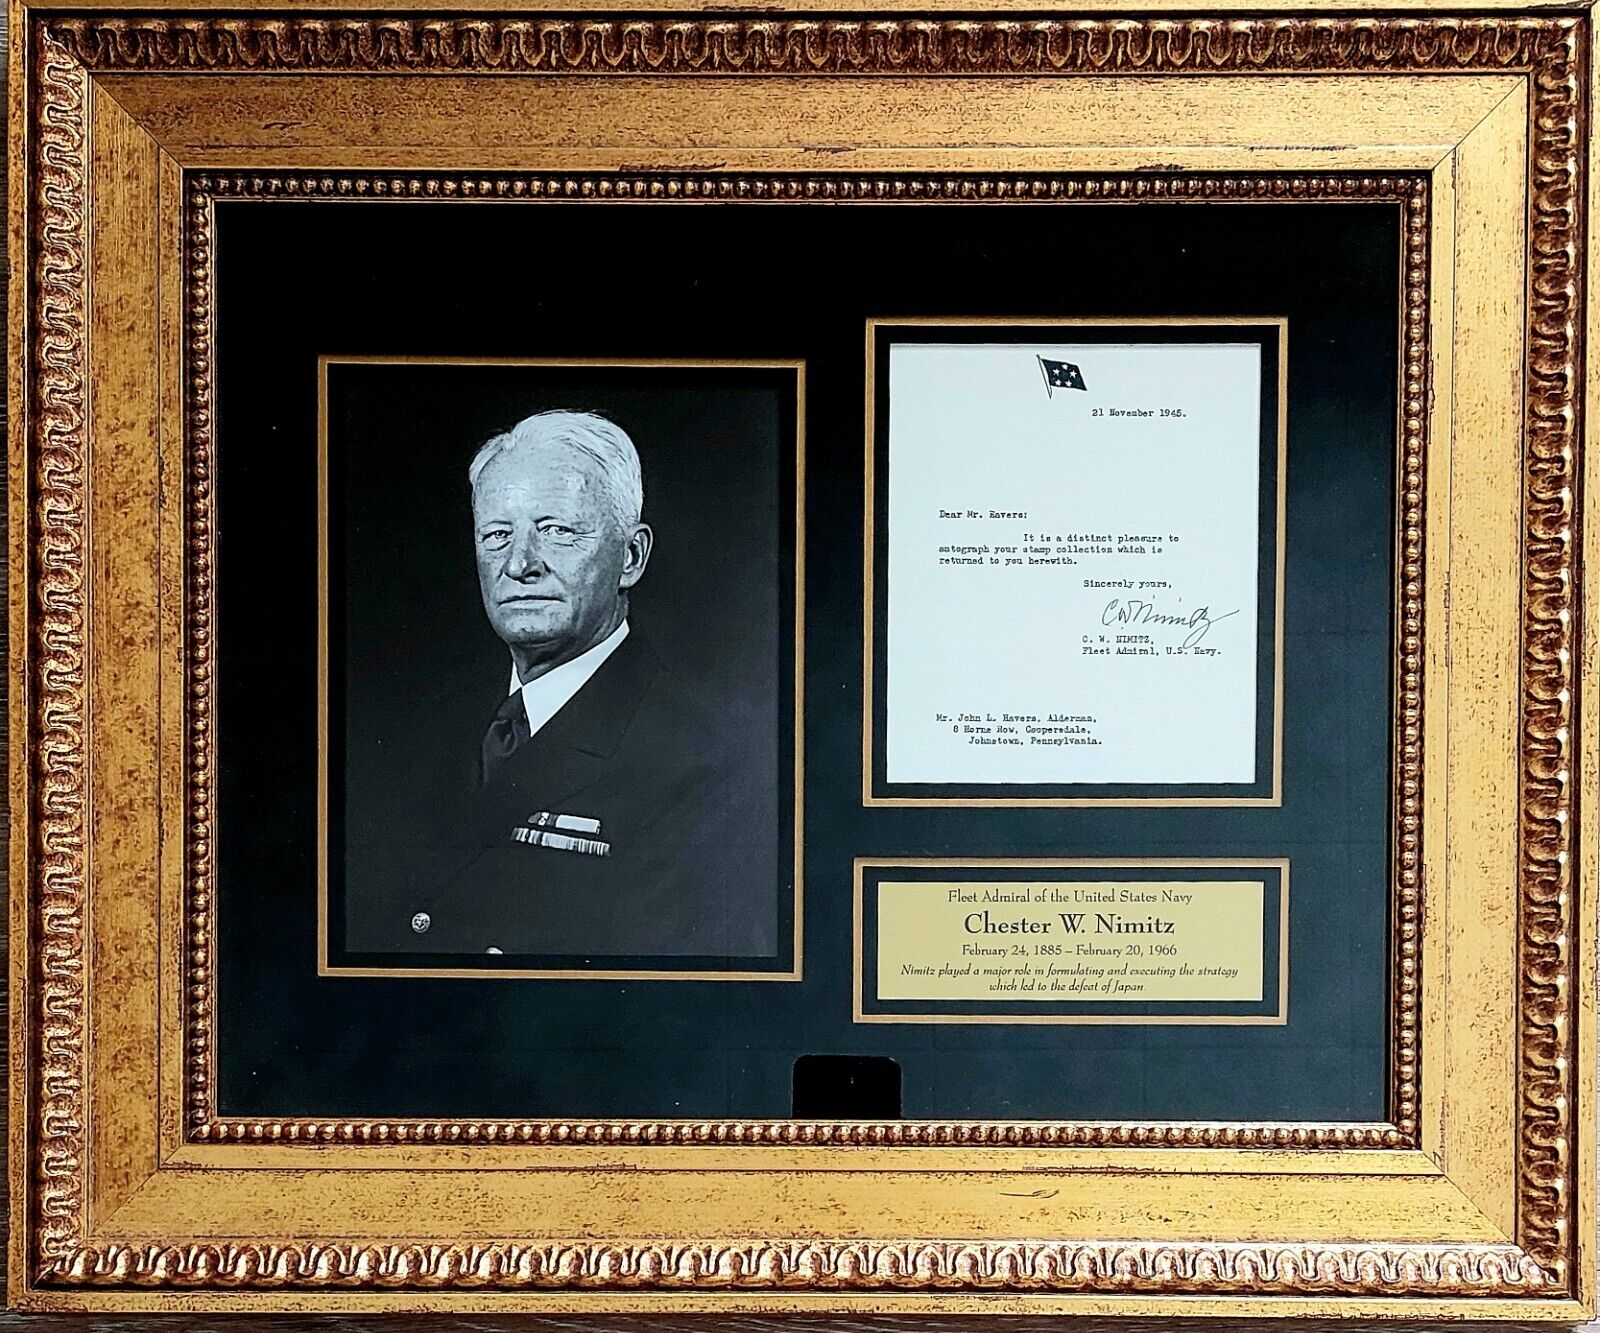 Fleet Admiral Chester W. Nimitz Signed Display With JSA Letter of Authenticity.